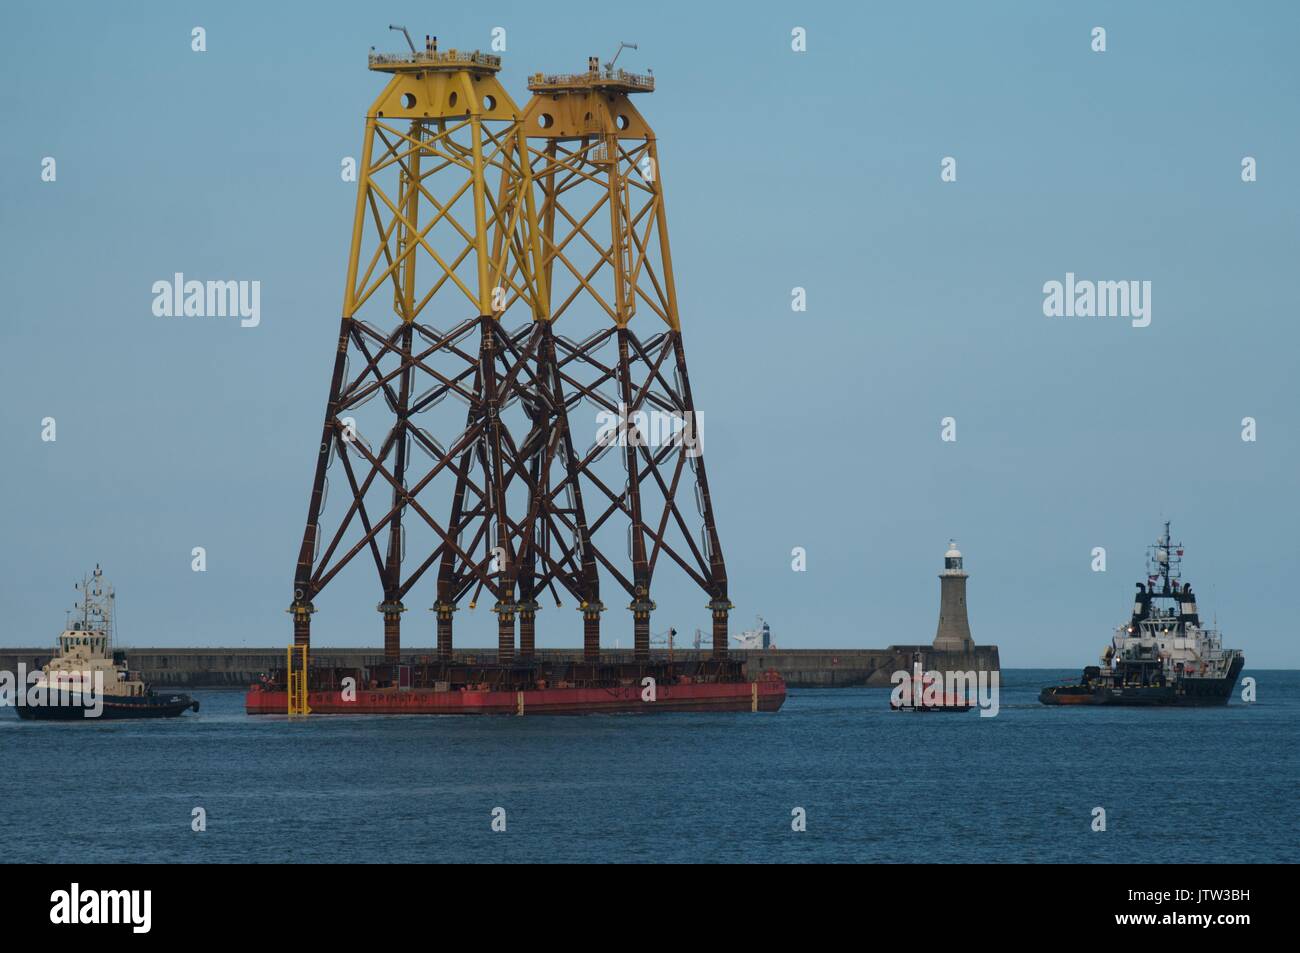 River Tyne, South Shields, UK, 10th August 2017. Wind turbine foundations pass Tynemouth pier and lighthouse on their way to the Beatrice offshore wind farm in the Moray Firth. Due to their height National Grid had to raise the height of power cables across the Tyne despite the pylons being two of the highest in Britain, surpassed only by sets spanning the River Thames near London and the River Severn in Bristol. Credit: Colin Edwards/Alamy Live News. Stock Photo